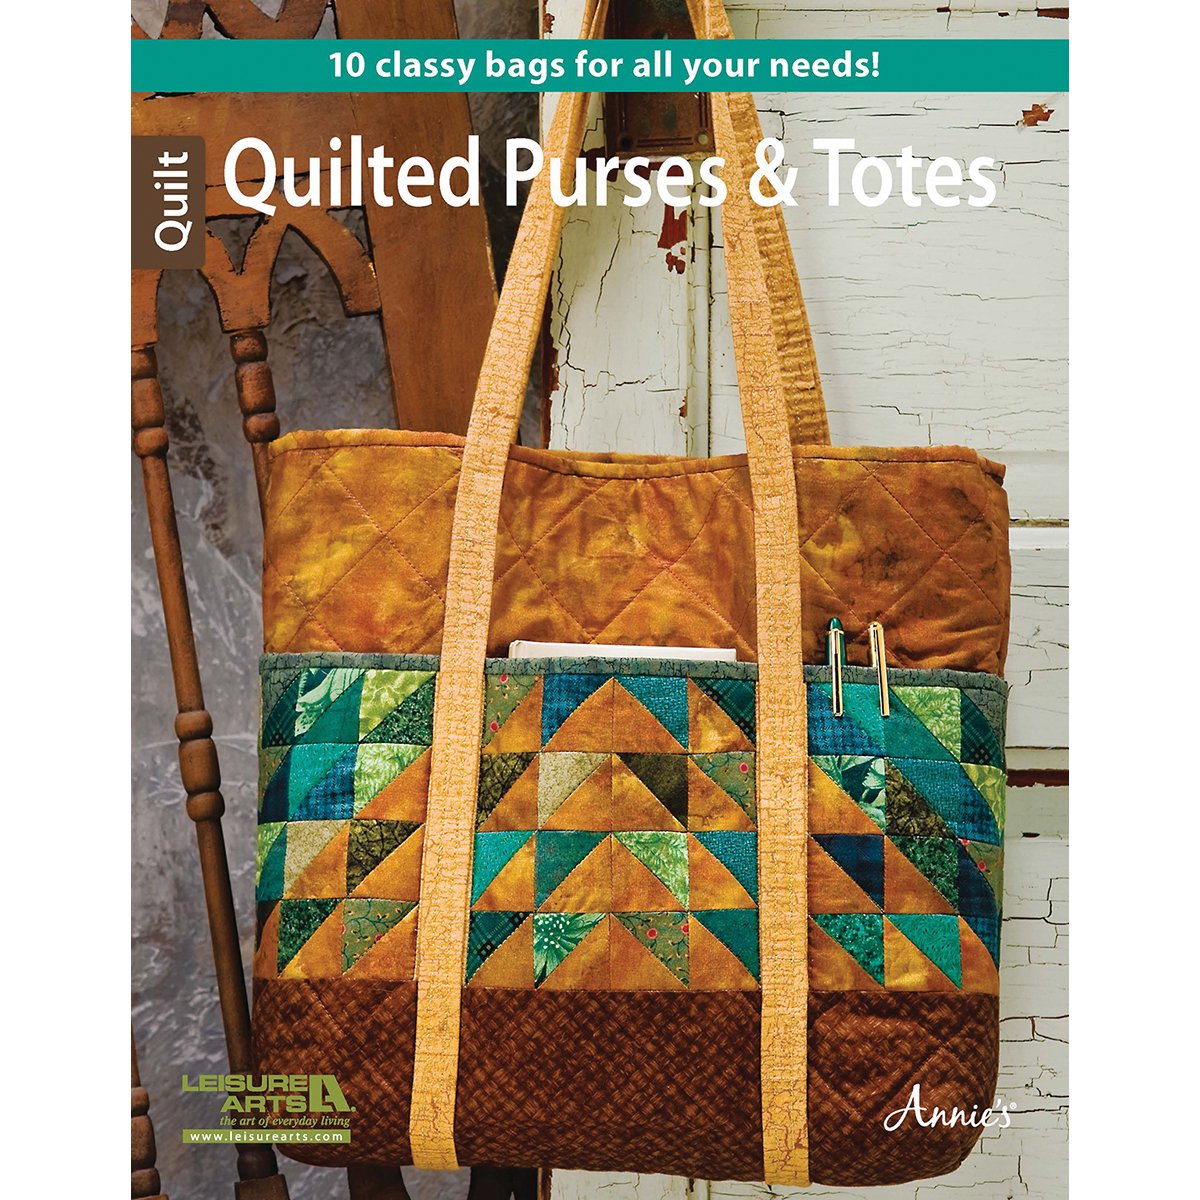 Quilted Purses & Totes